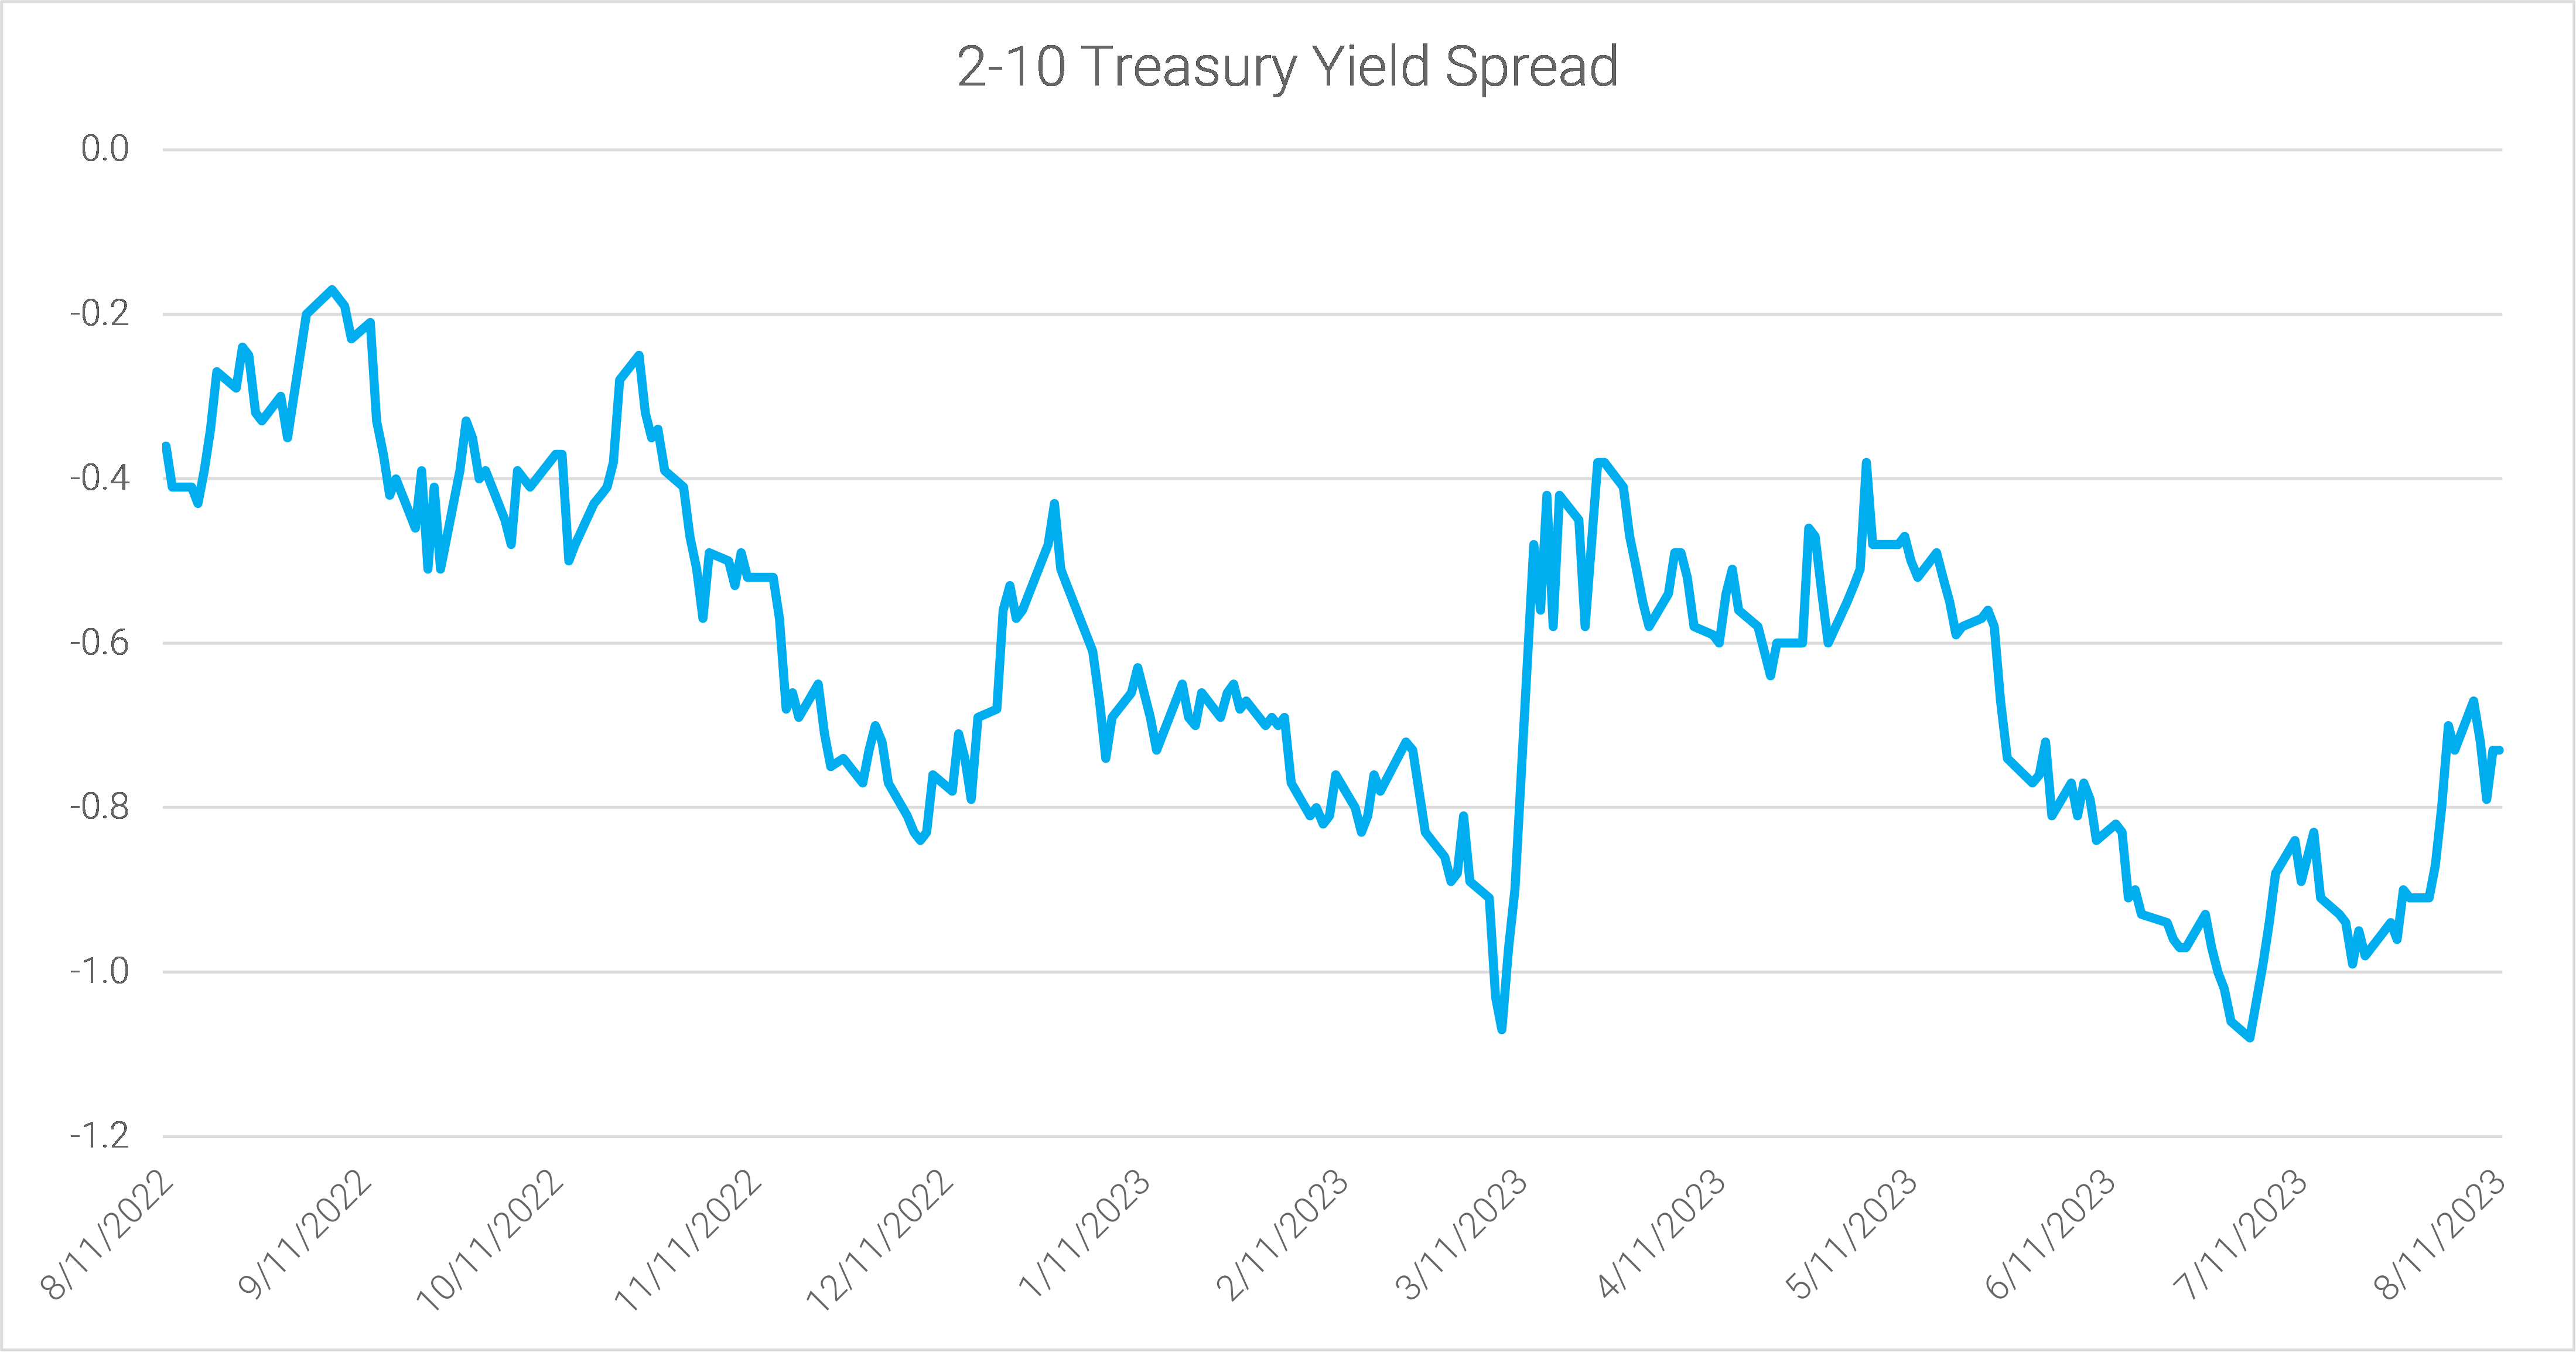 07-the-2-10-spread-was-flat-last-week-at--73bps